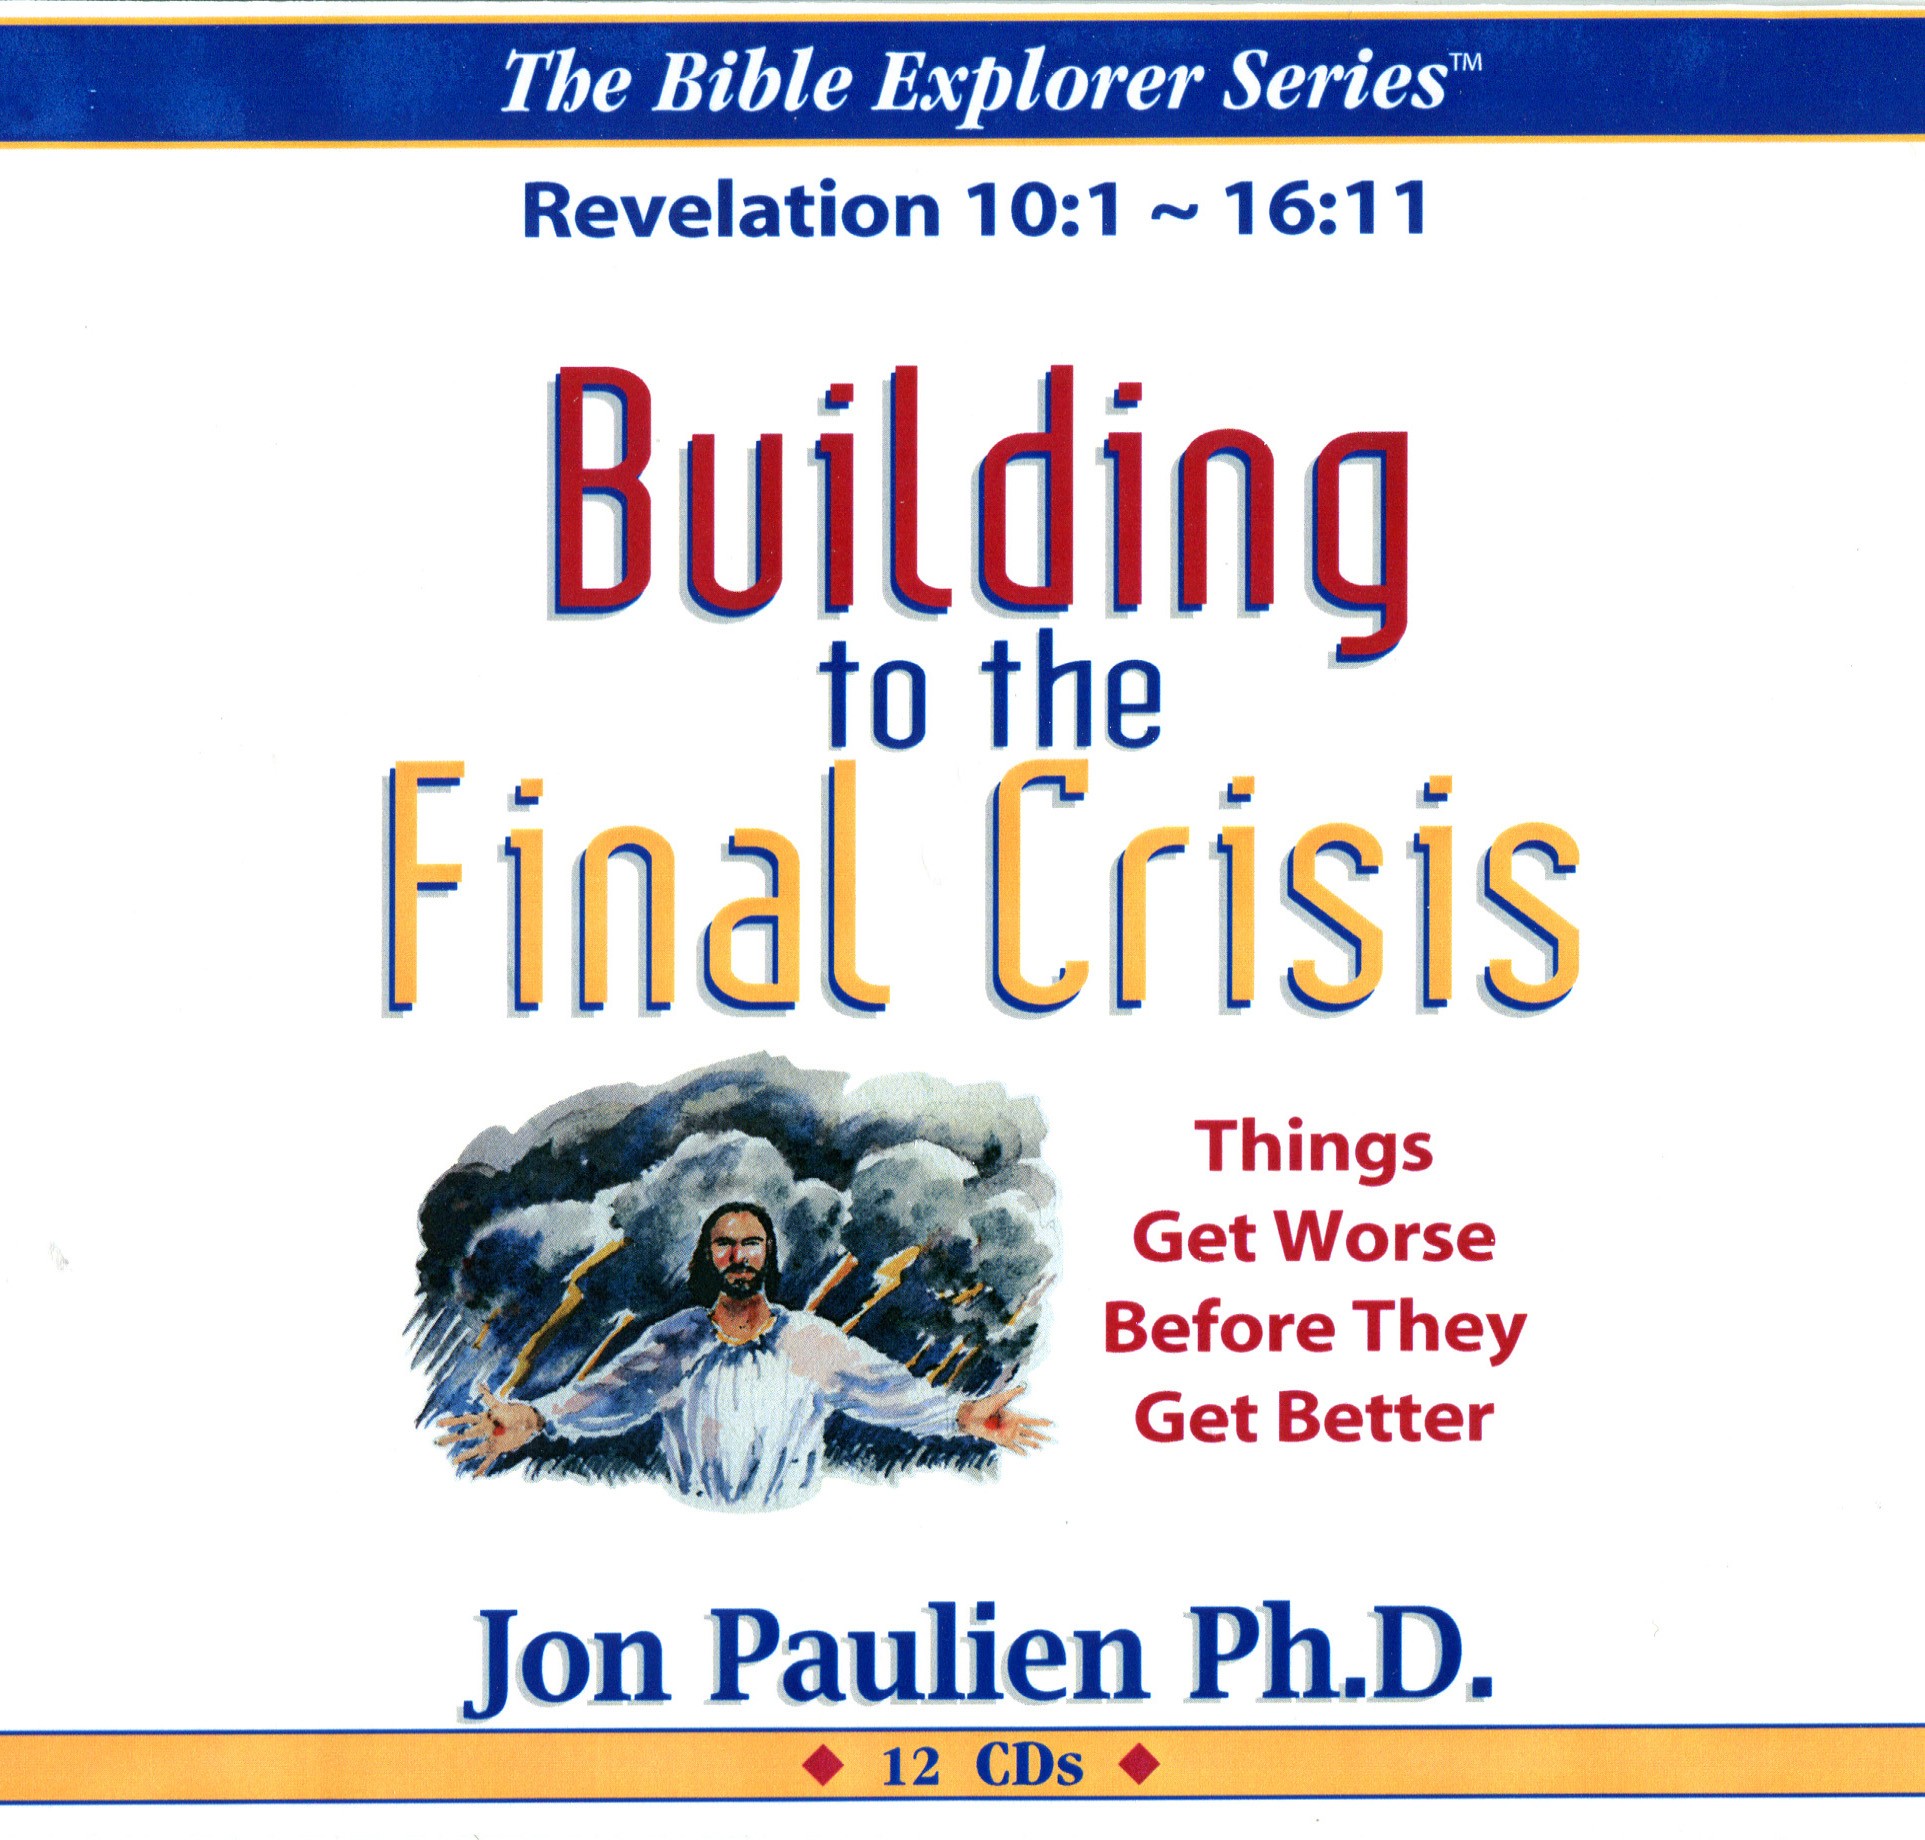 mp3 DOWNLOAD >> REVELATION 10:1 - 16:11 >> Building To The Final Crisis >> Things Get Worse Before They Get Better